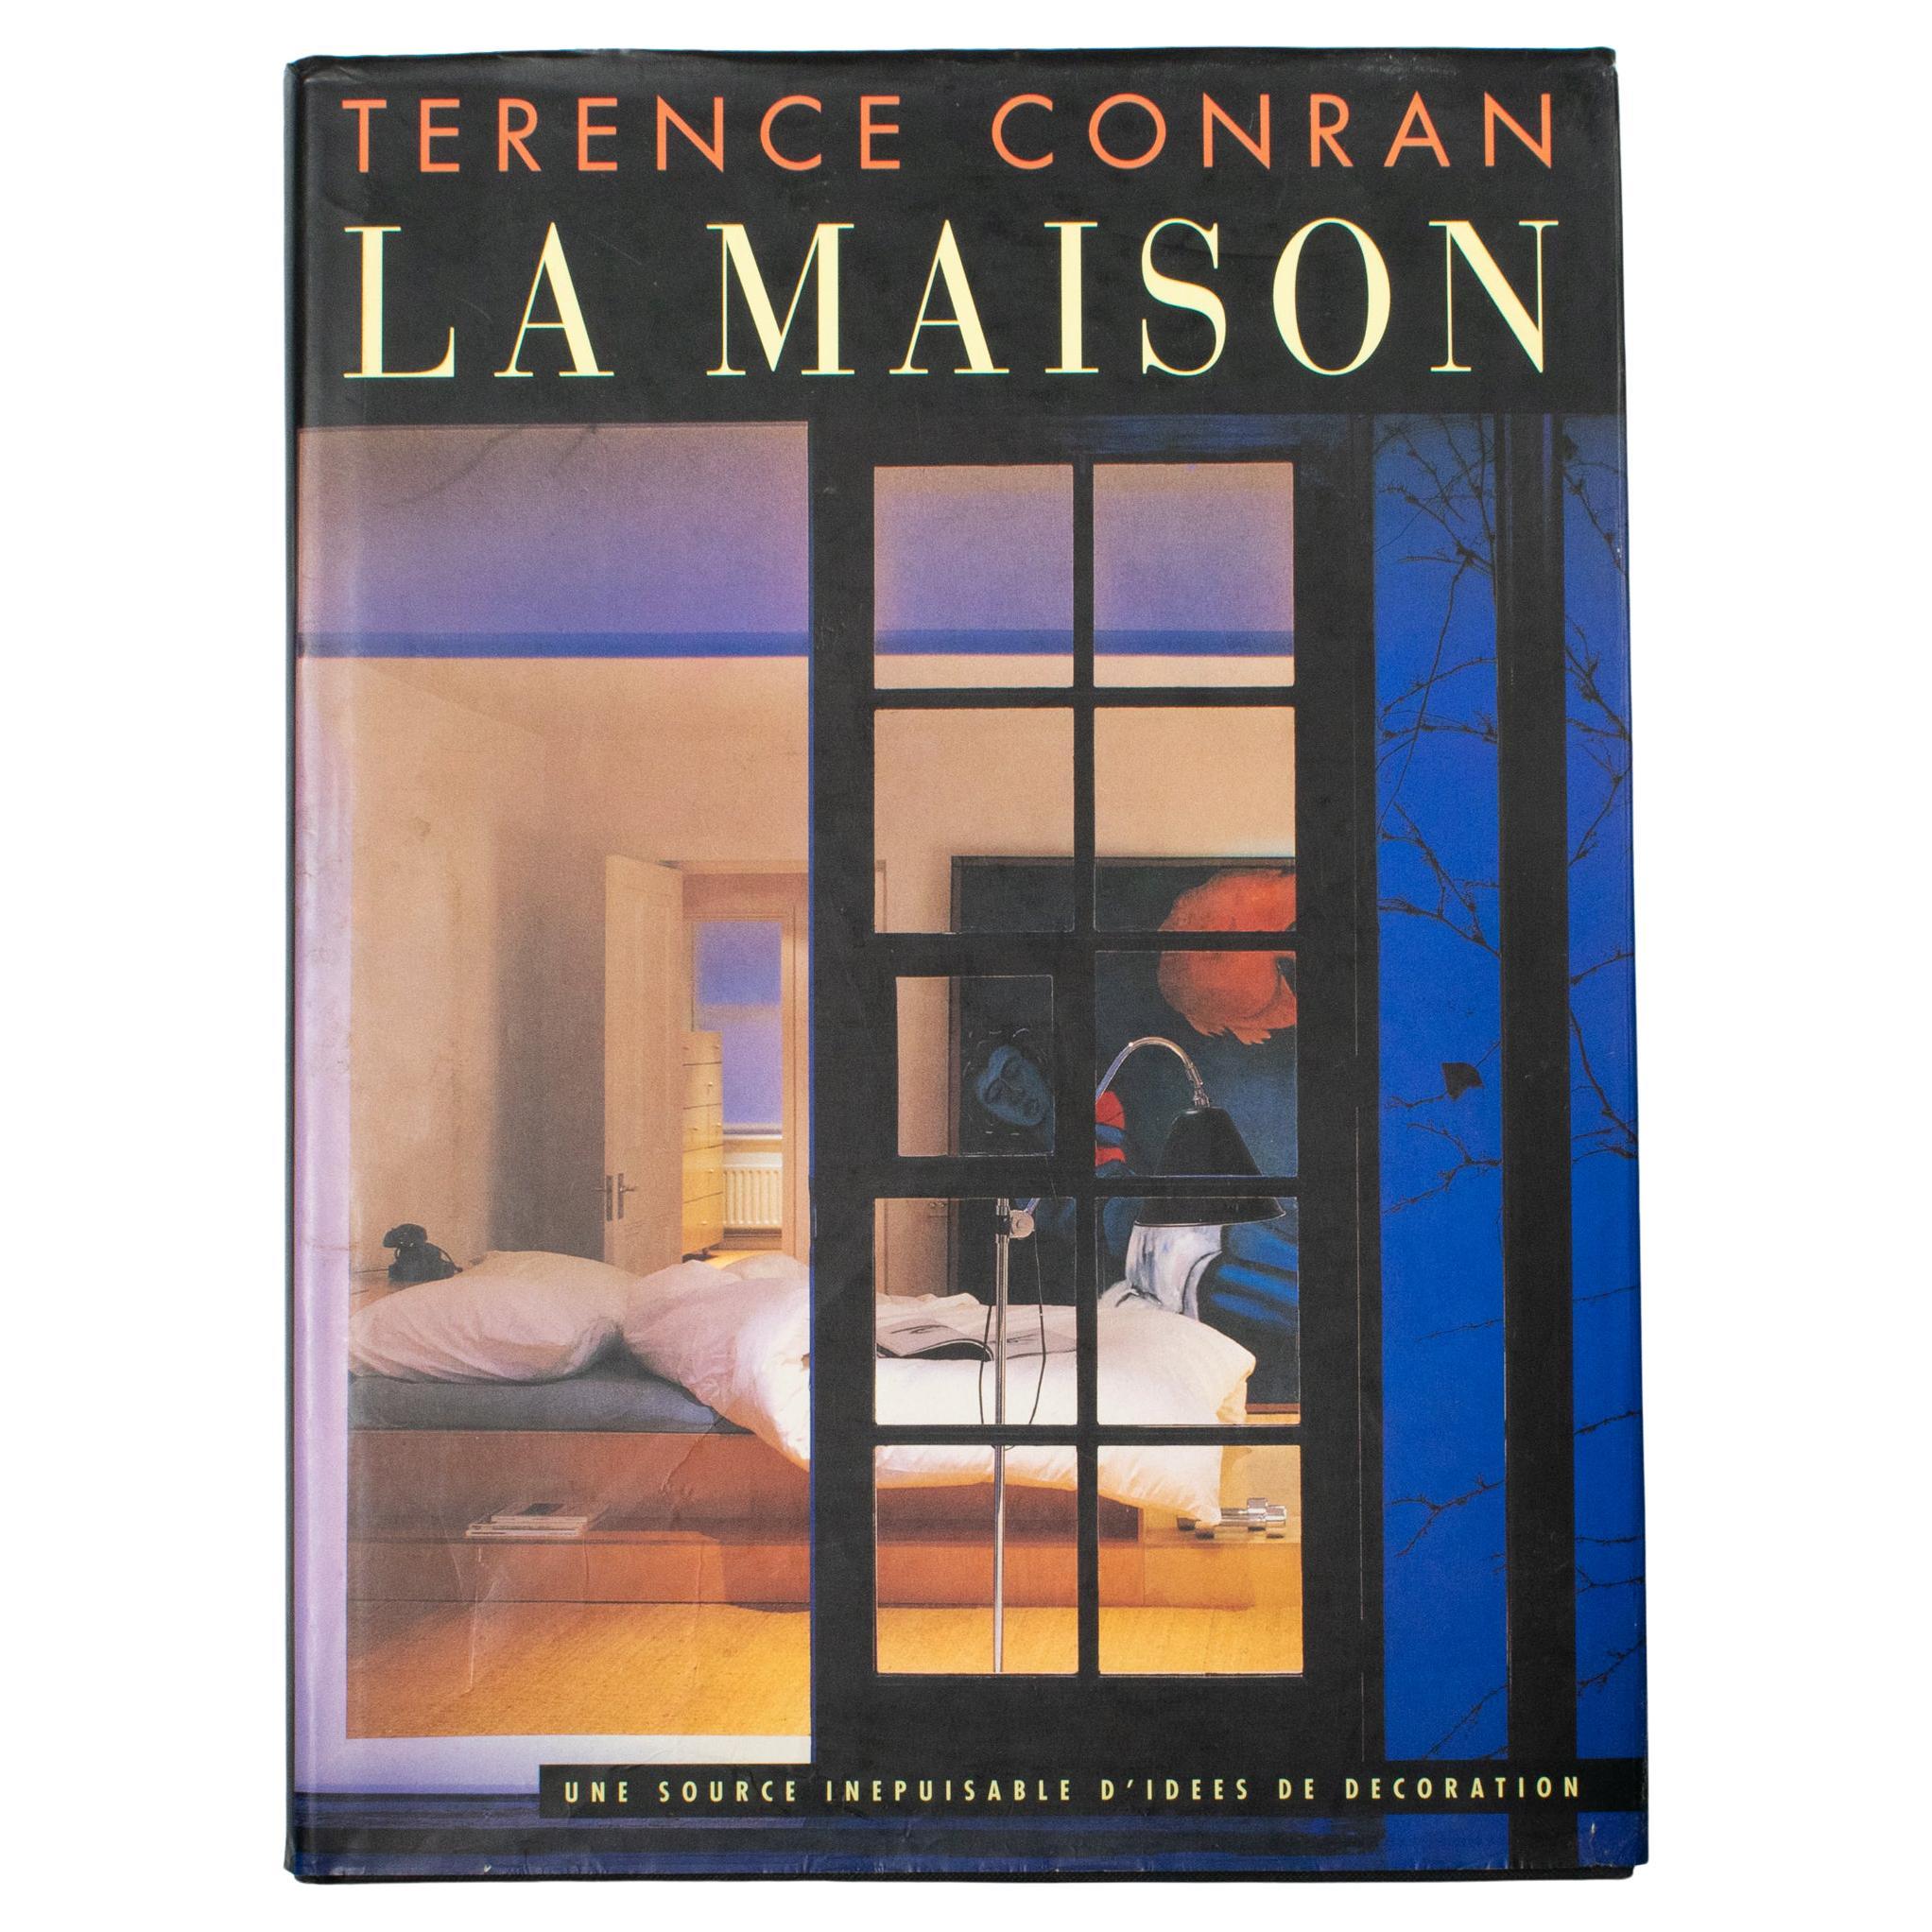 La Maison Book, by Sir Terence Conran, French Edition, 1994